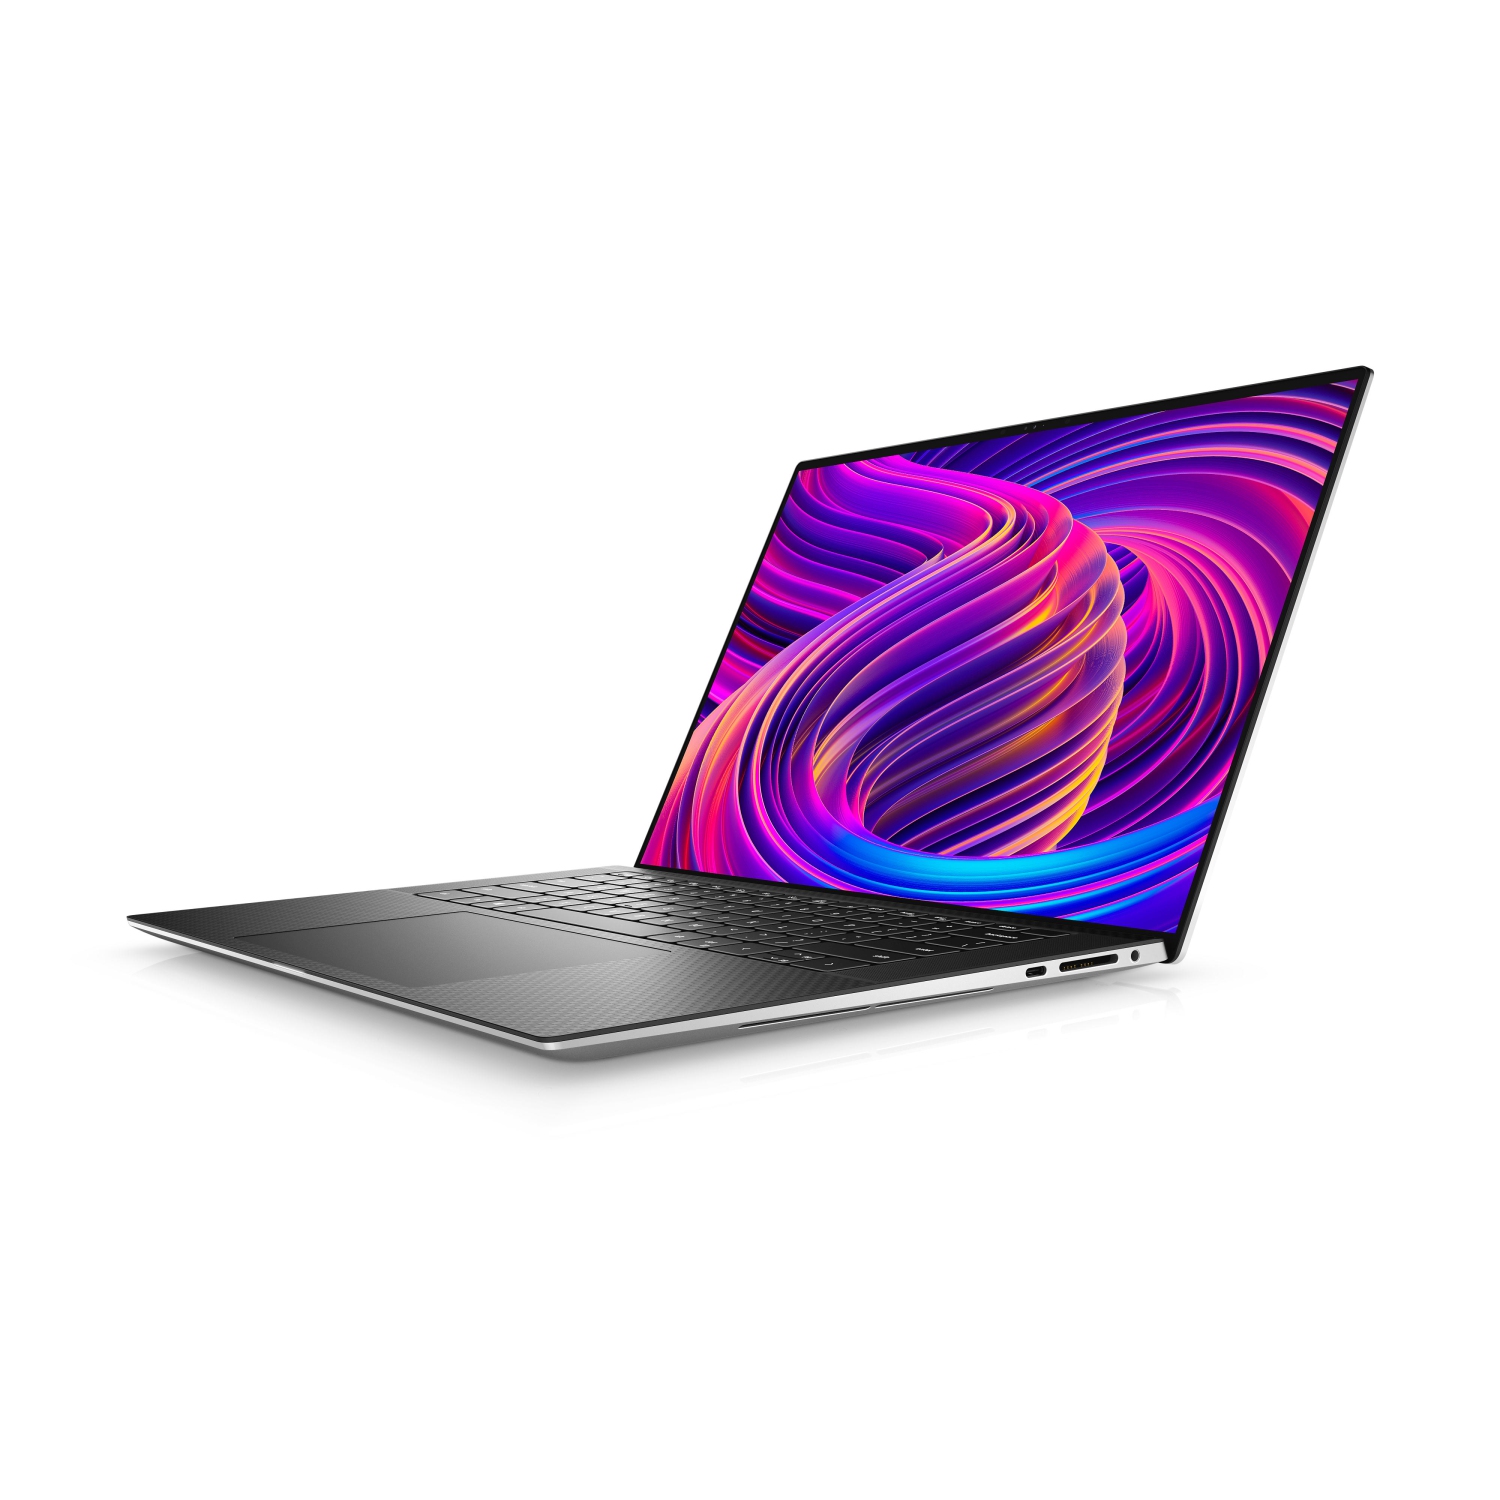 Refurbished (Excellent) - Dell XPS 15 9510 Laptop (2021) | 15.6" FHD+ | Core i7 - 1TB SSD - 64GB RAM - 3050 Ti | 8 Cores @ 4.6 GHz - 11th Gen CPU Certified Refurbished